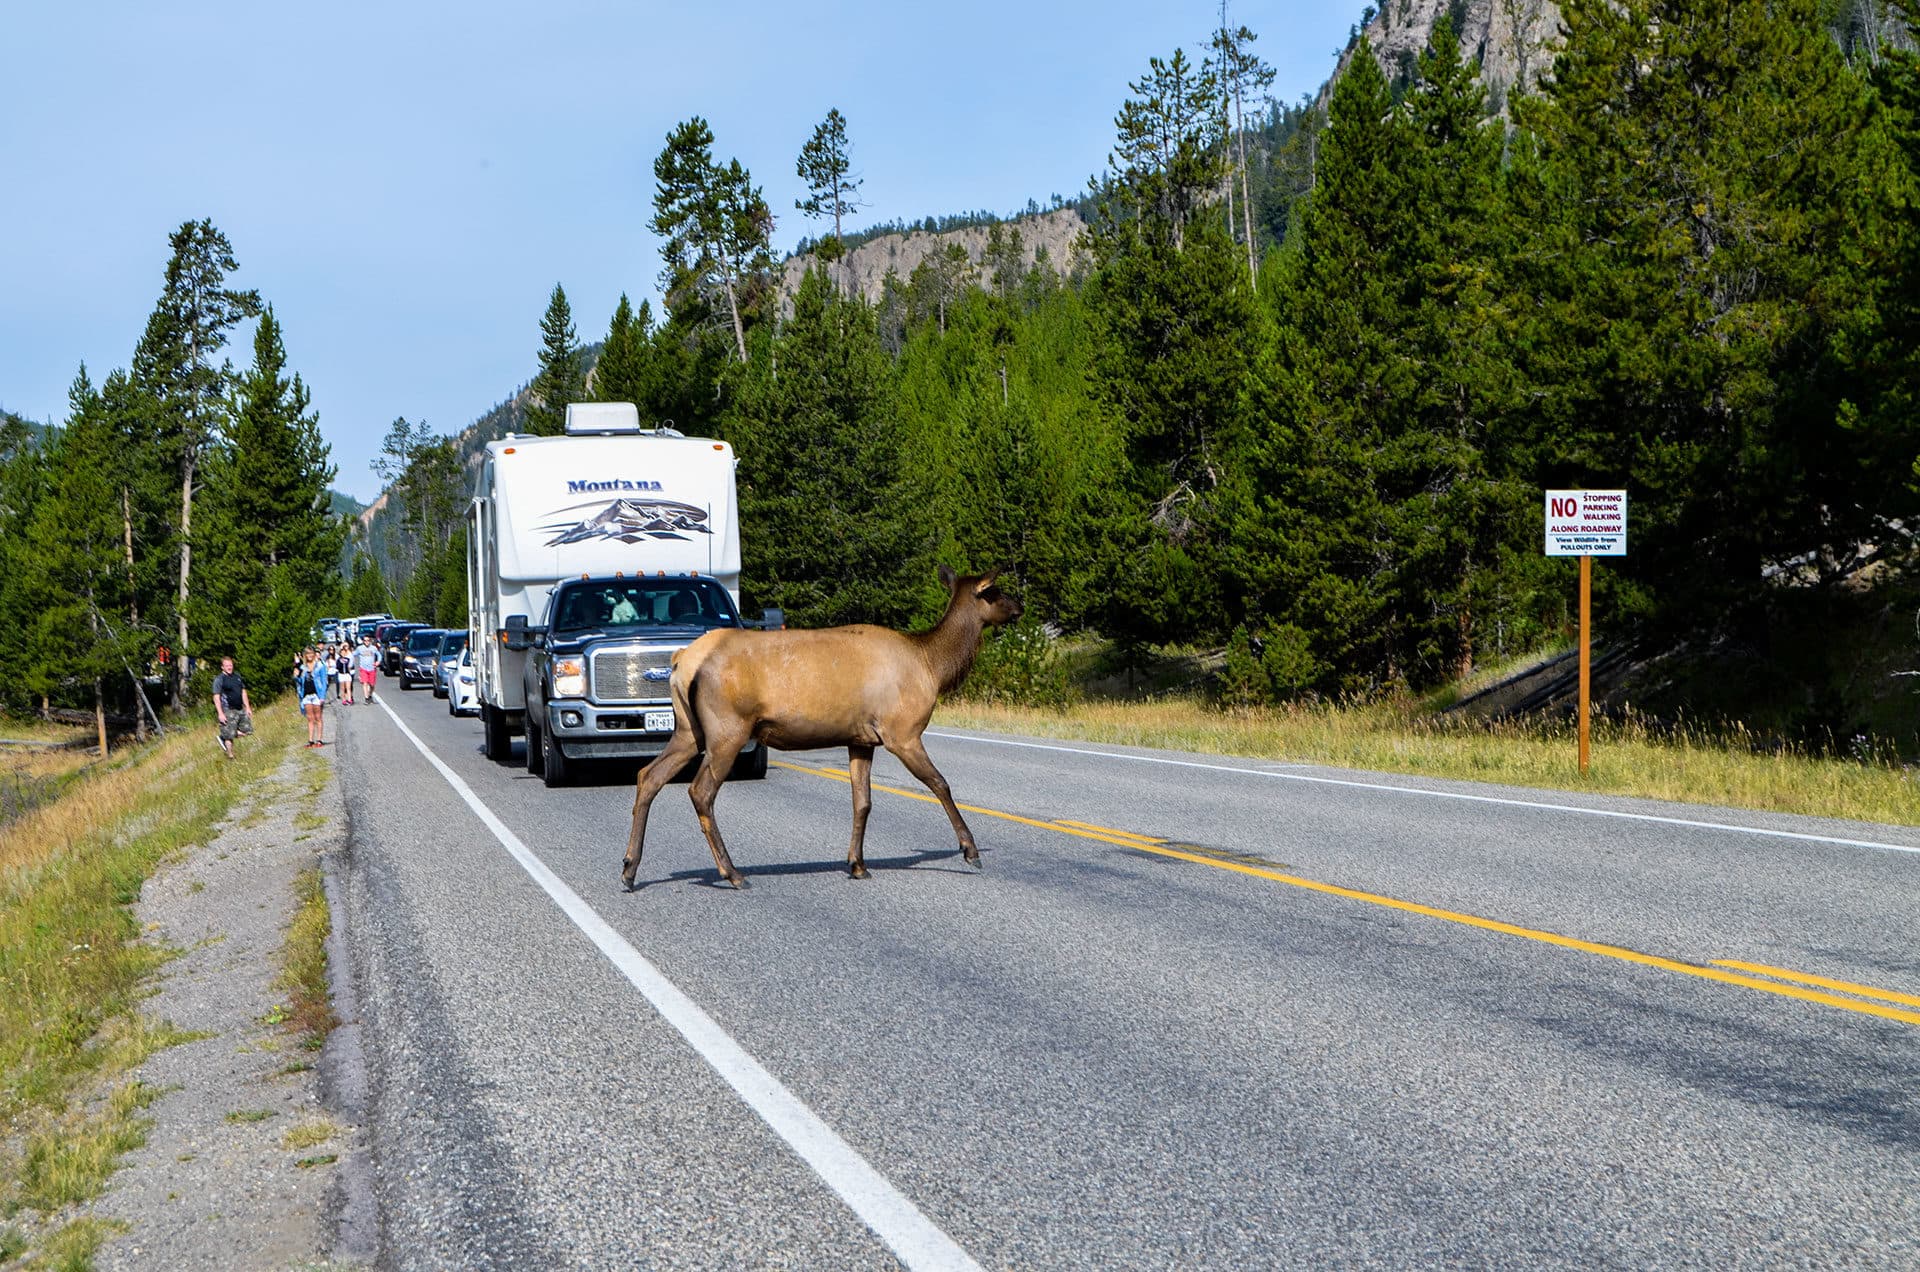 Deer crossing the road in Yellowstone National Park.